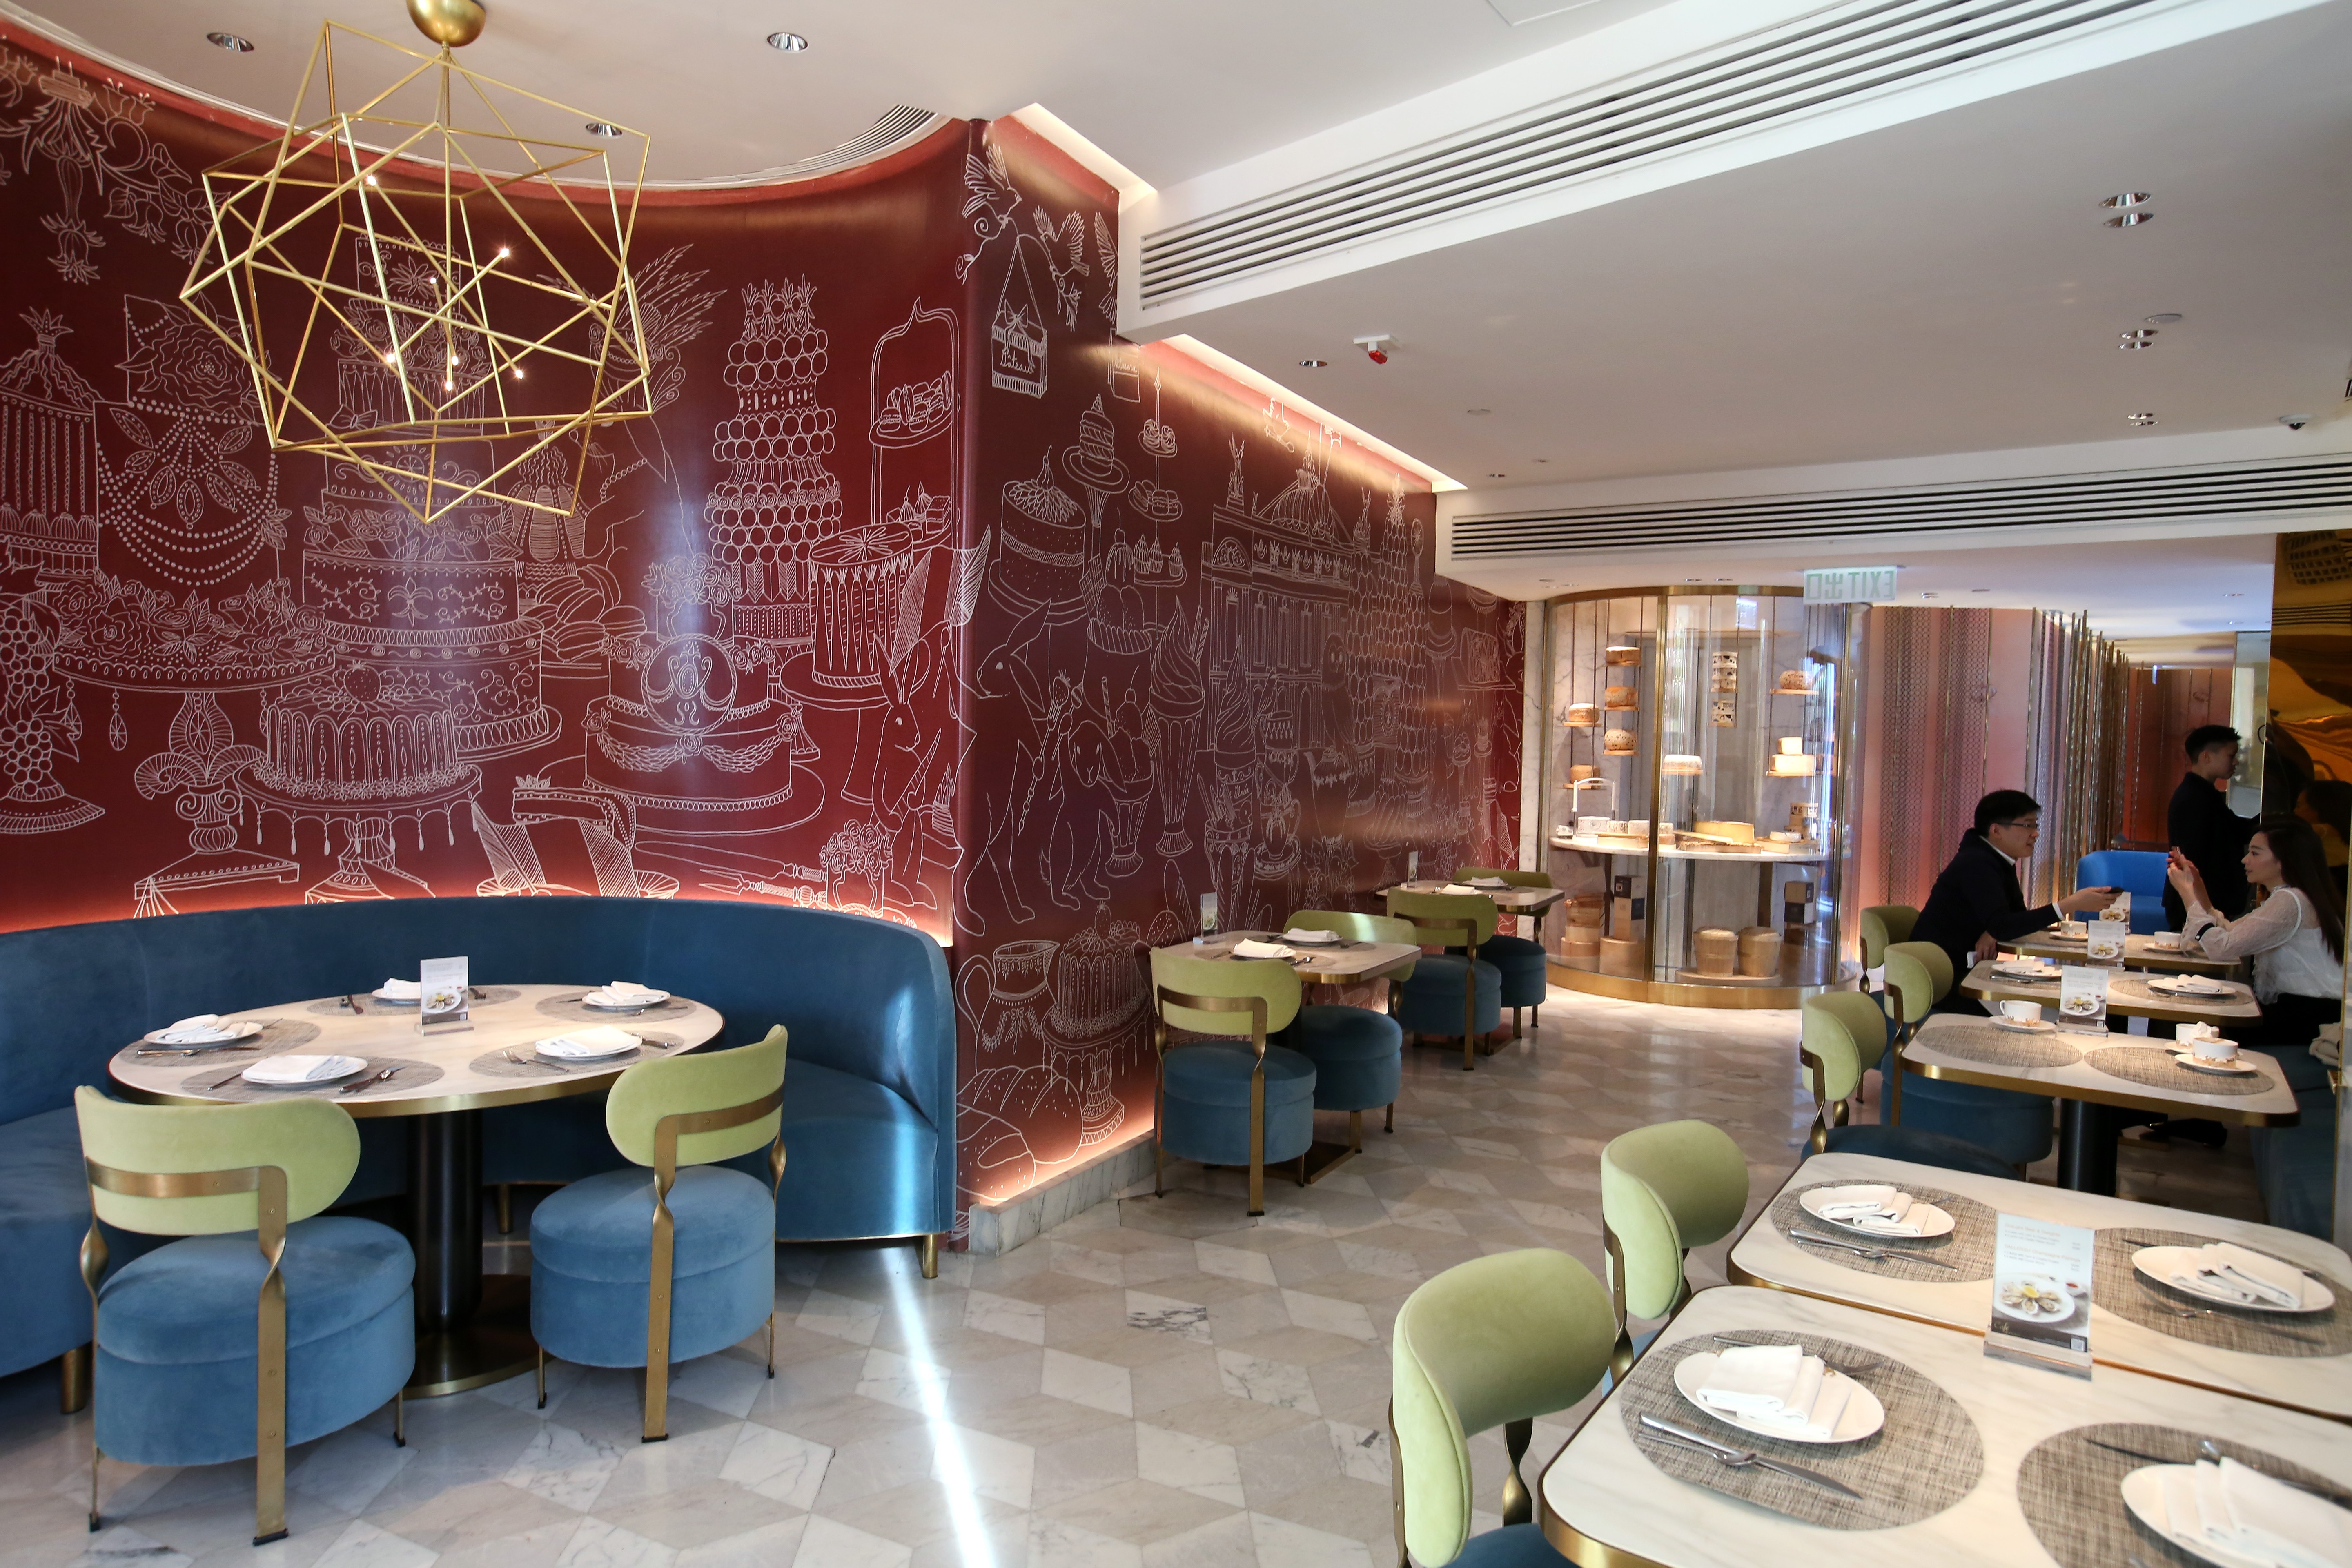 Épure filled a need for French fine dining in Kowloon, according to Gourmet Dining Group’s managing director, Michelle Ma Chan. Photo: Edmond So